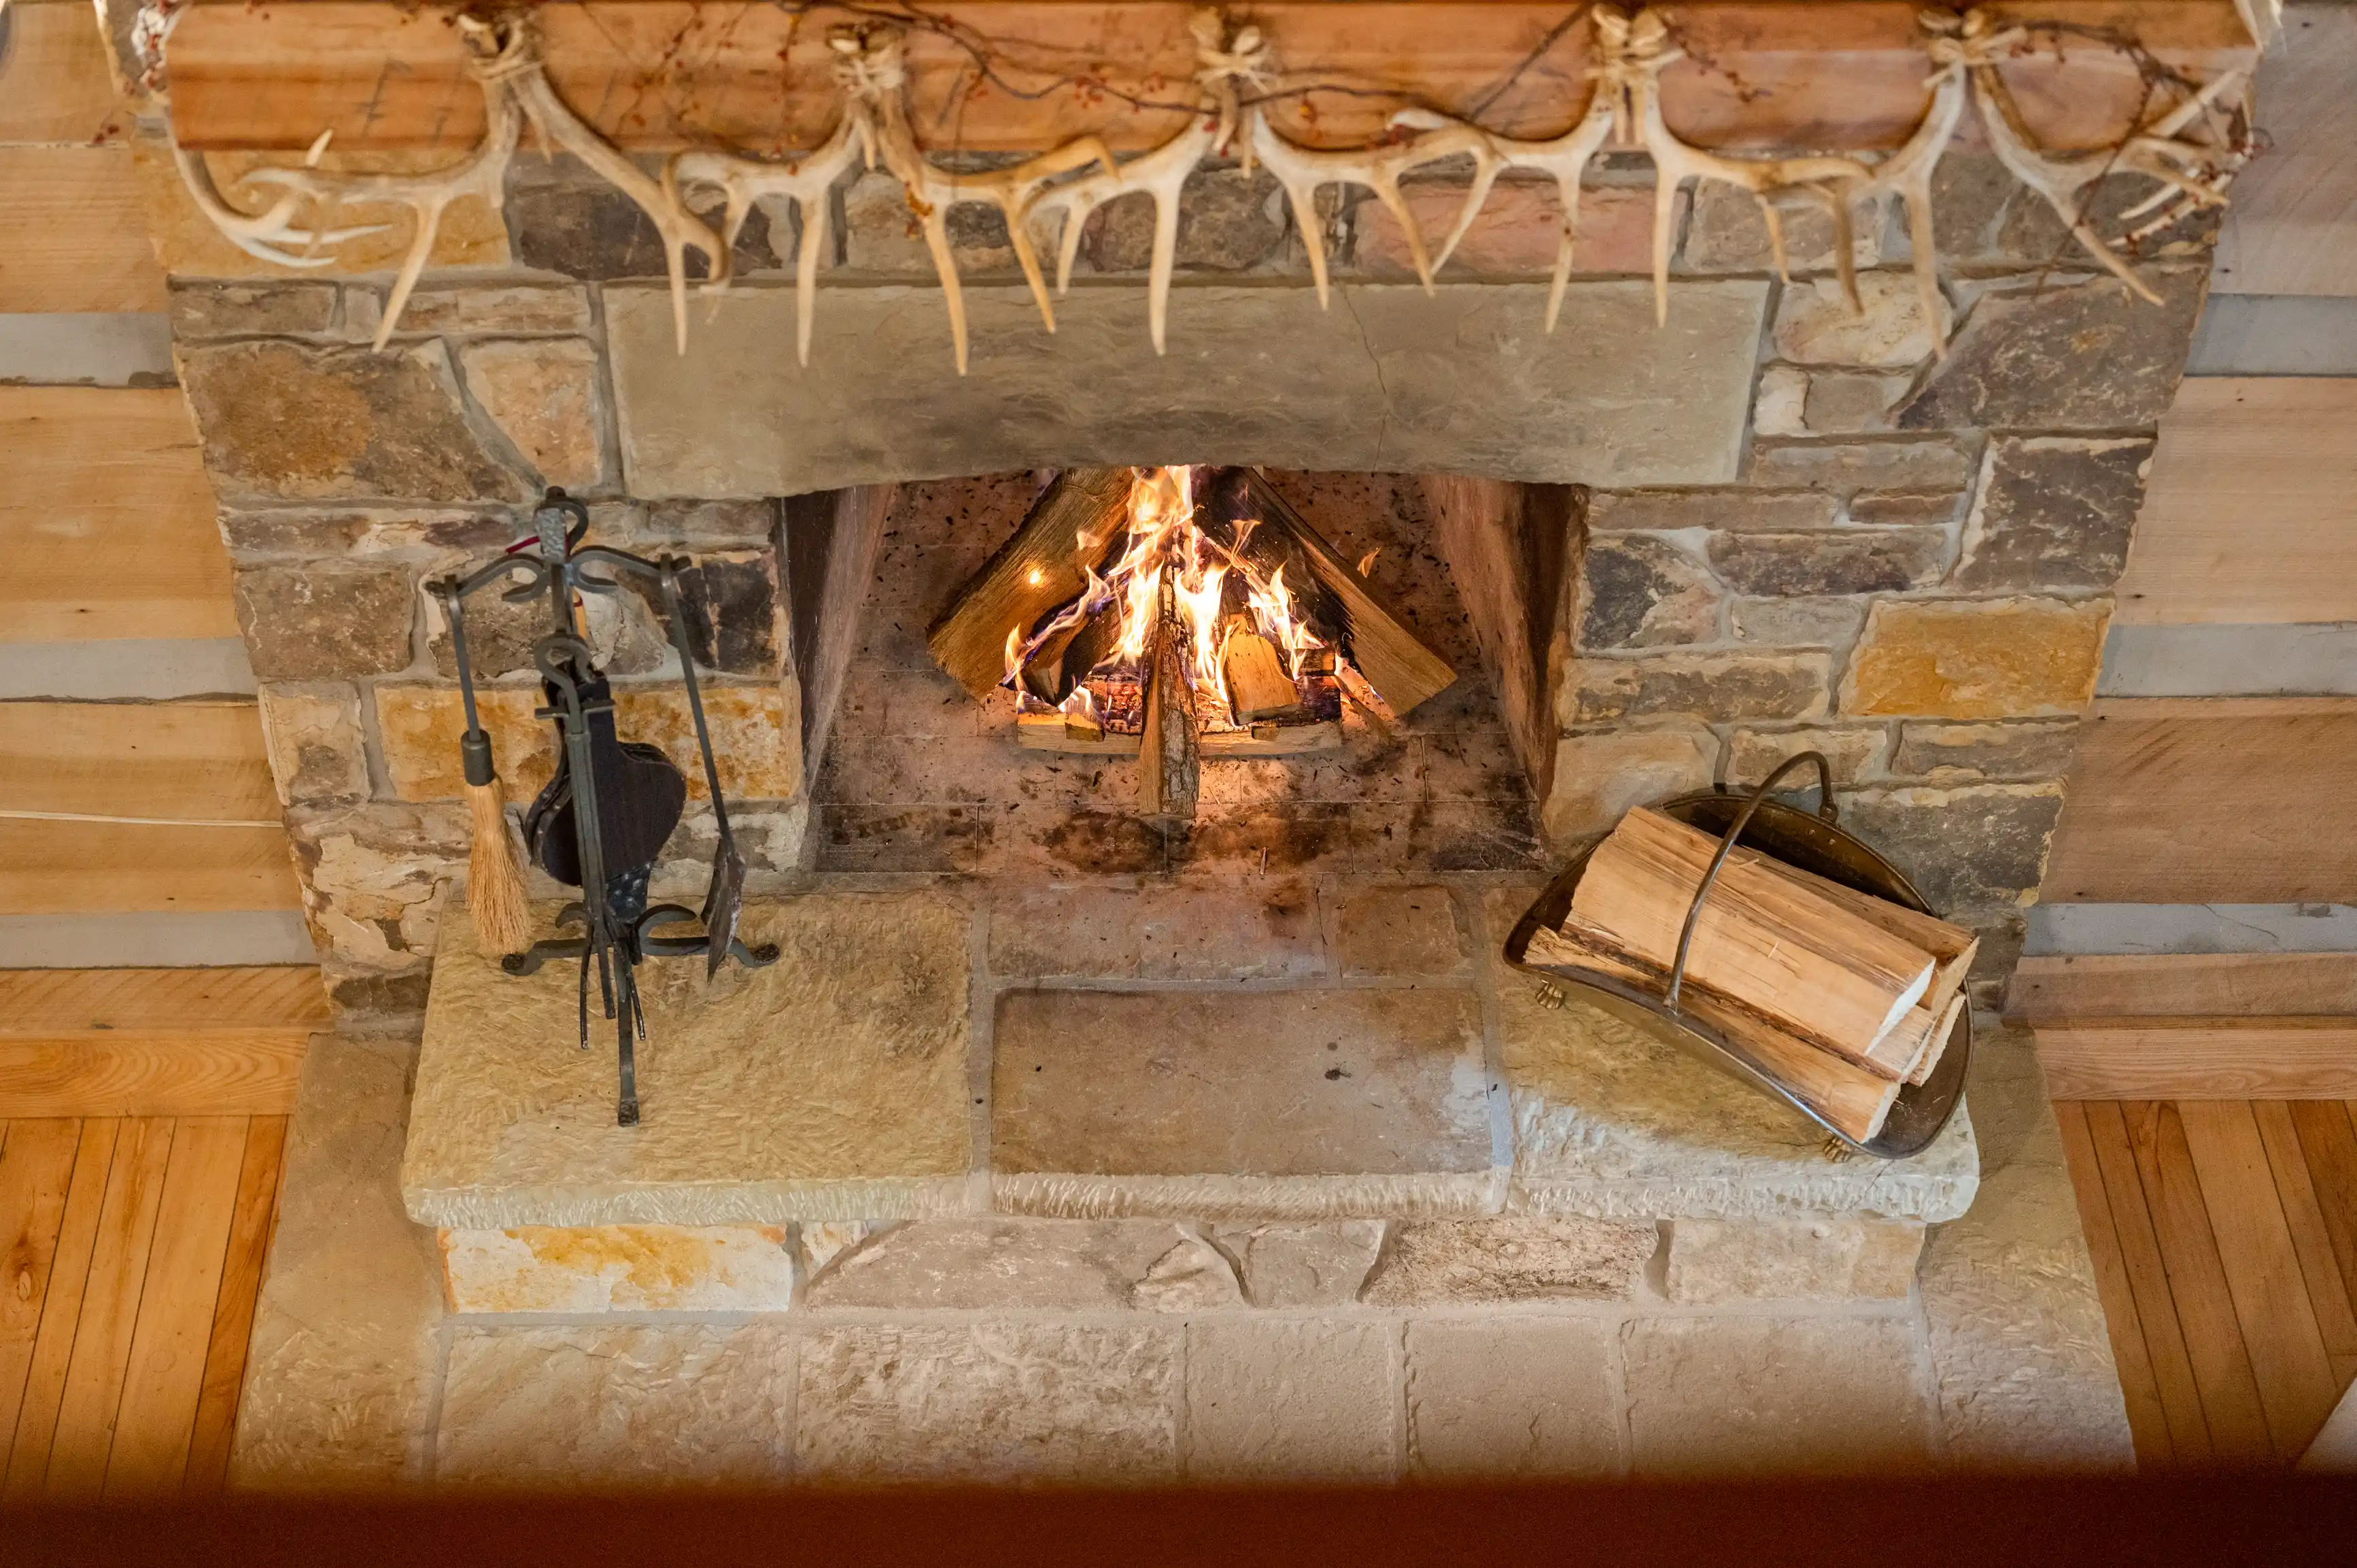 Cozy fireplace with a burning fire, flanked by fireplace tools on the left and a stack of logs on the right, under a mantel adorned with antlers.